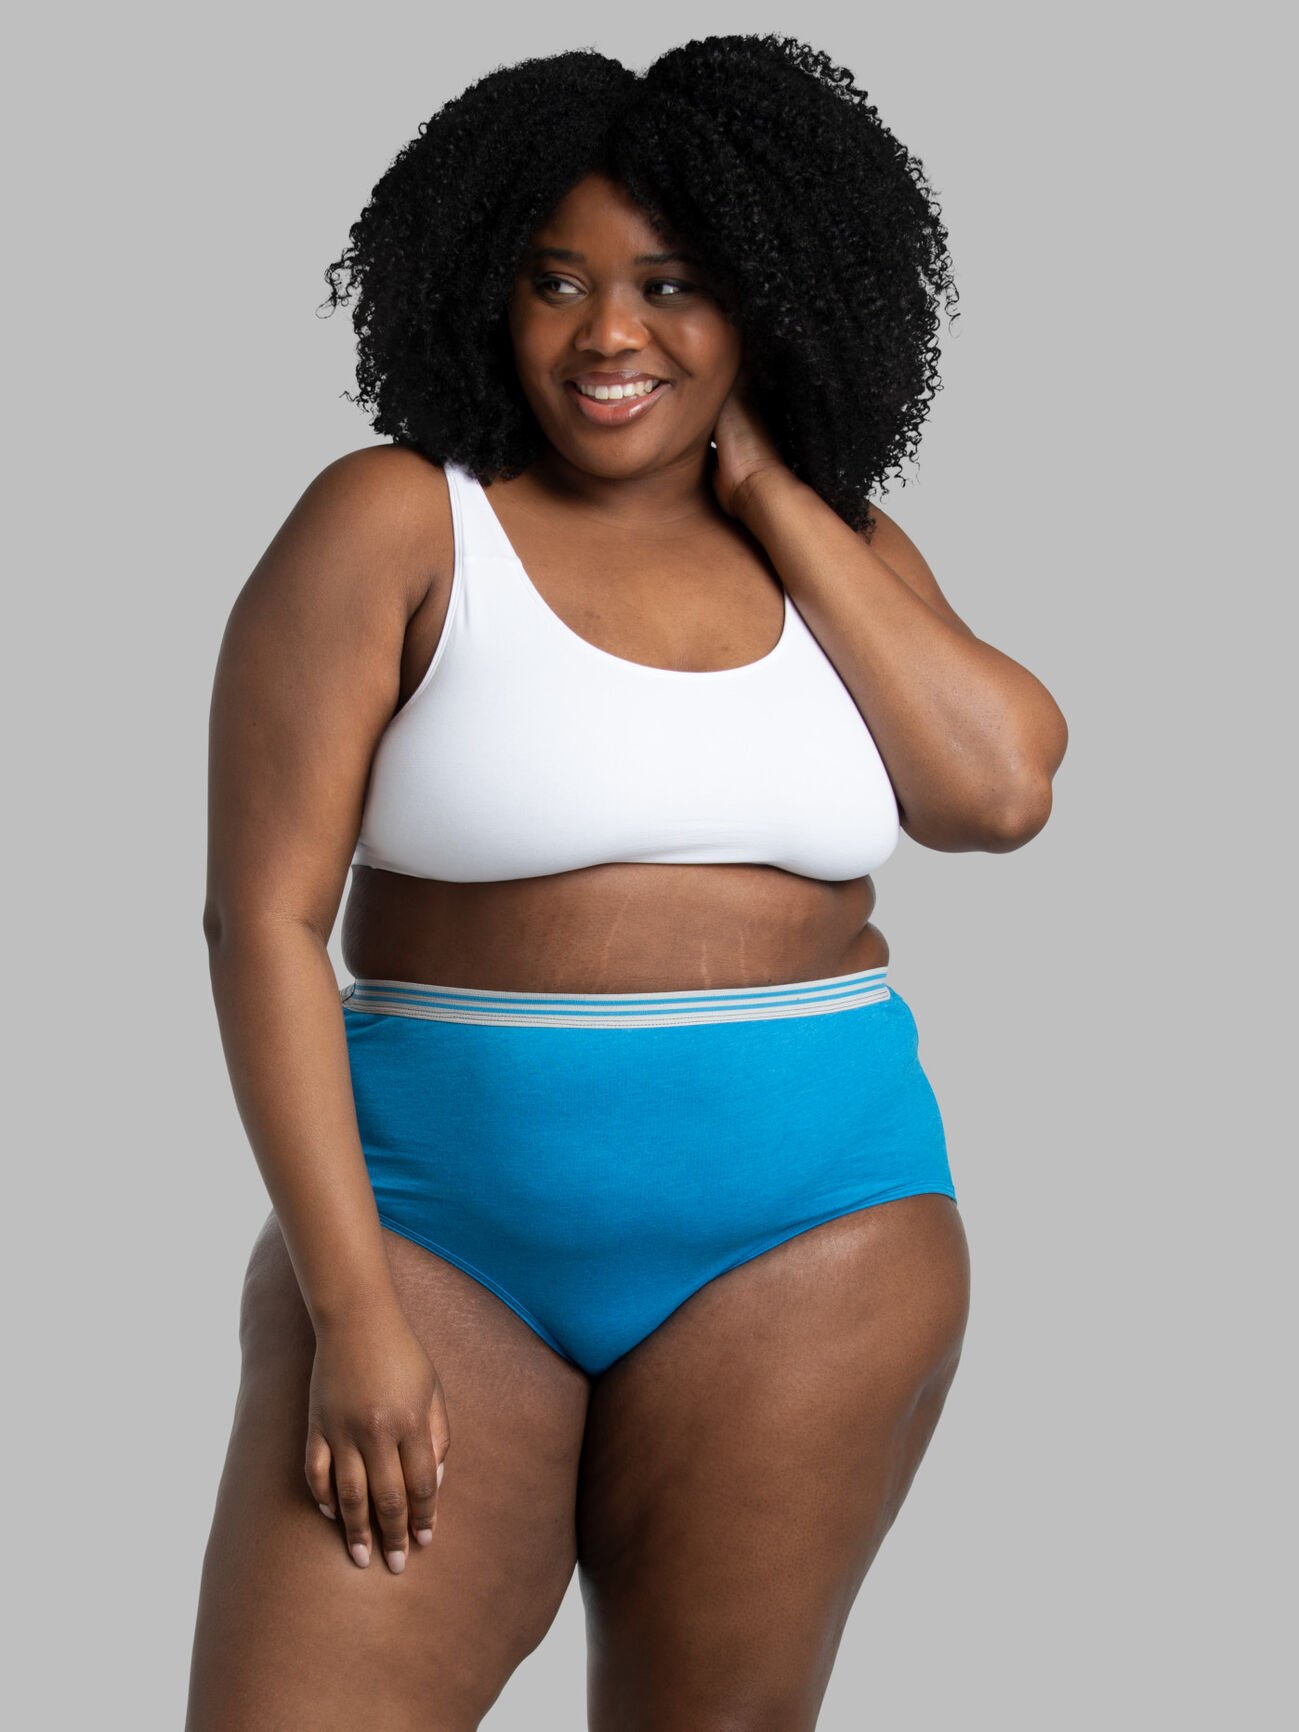 Fit for Me by Fruit of the Loom Women's Plus Size Hi-Cut Underwear, 10 Pack  